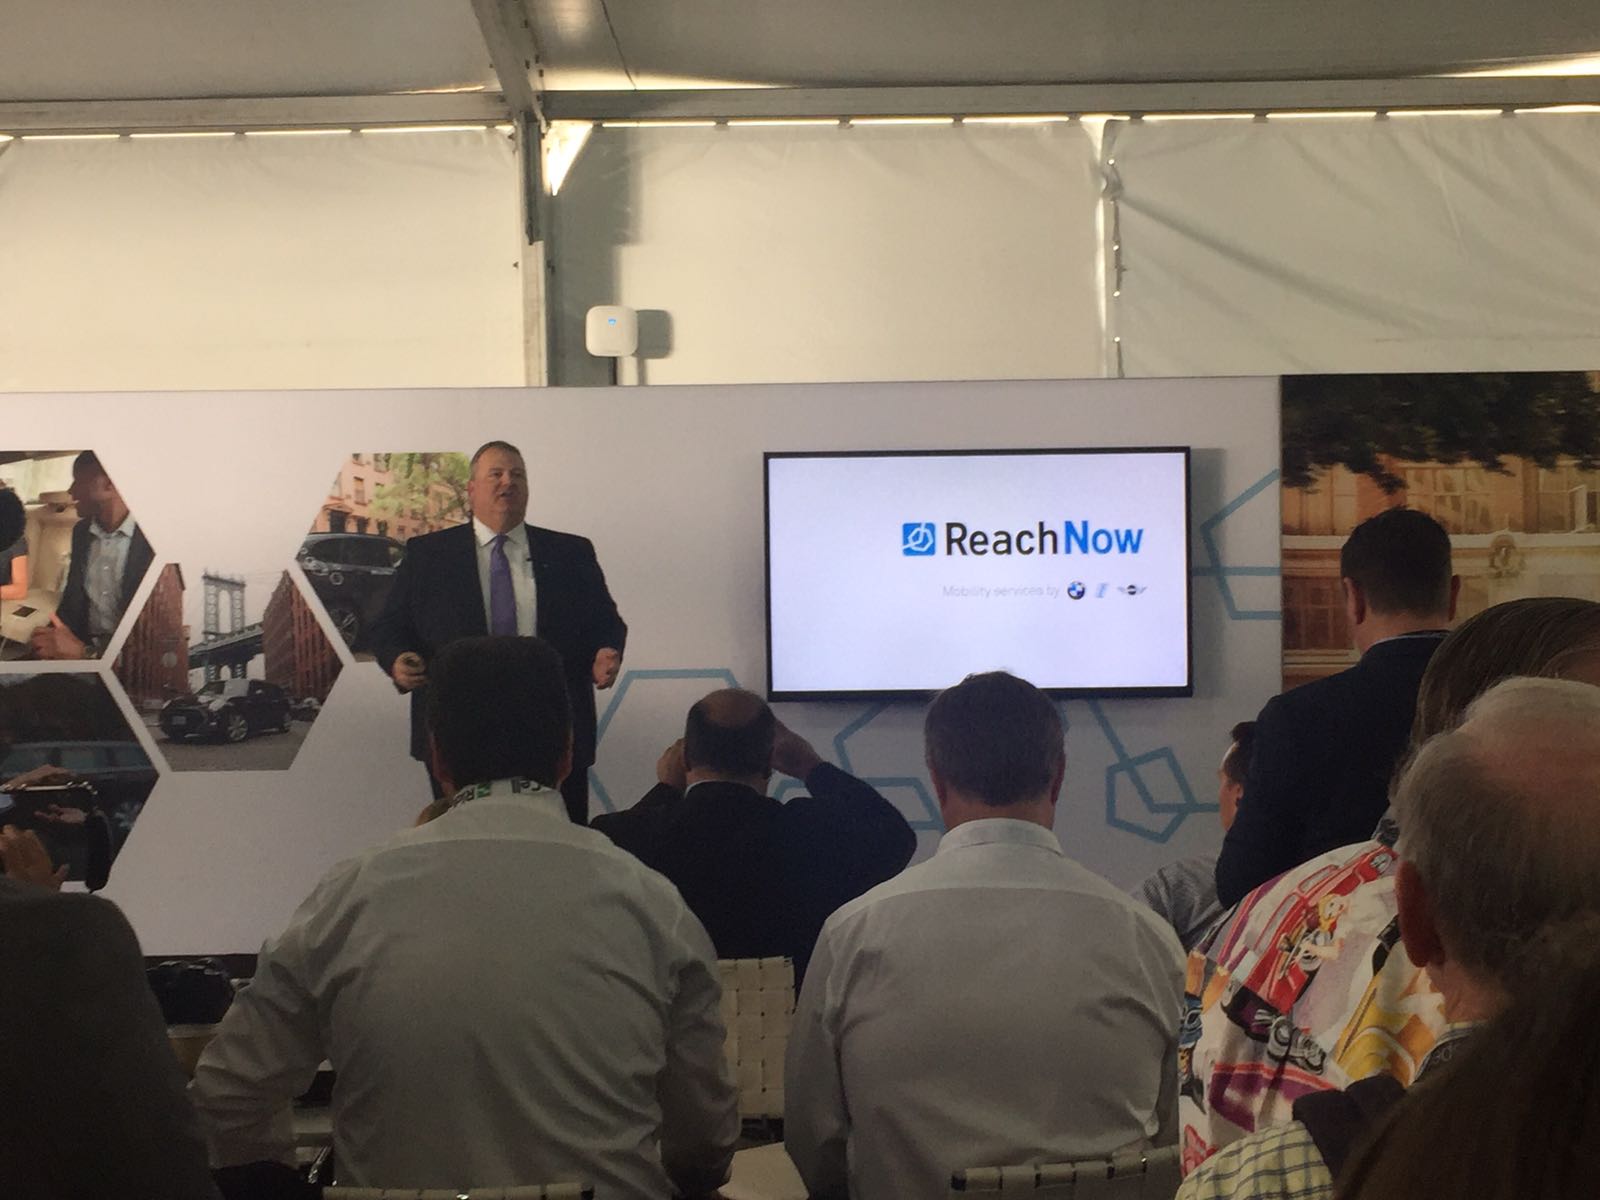 Steve Banfield CEO of BMW ReachNow, speaking at LA AutoMobility. BMW’s alternative mobility platform announced its expansion into Brooklyn, NY and debute its solutions for residential buildings. Brooklyn is ReachNow’s first foothold into the American East Coast. 